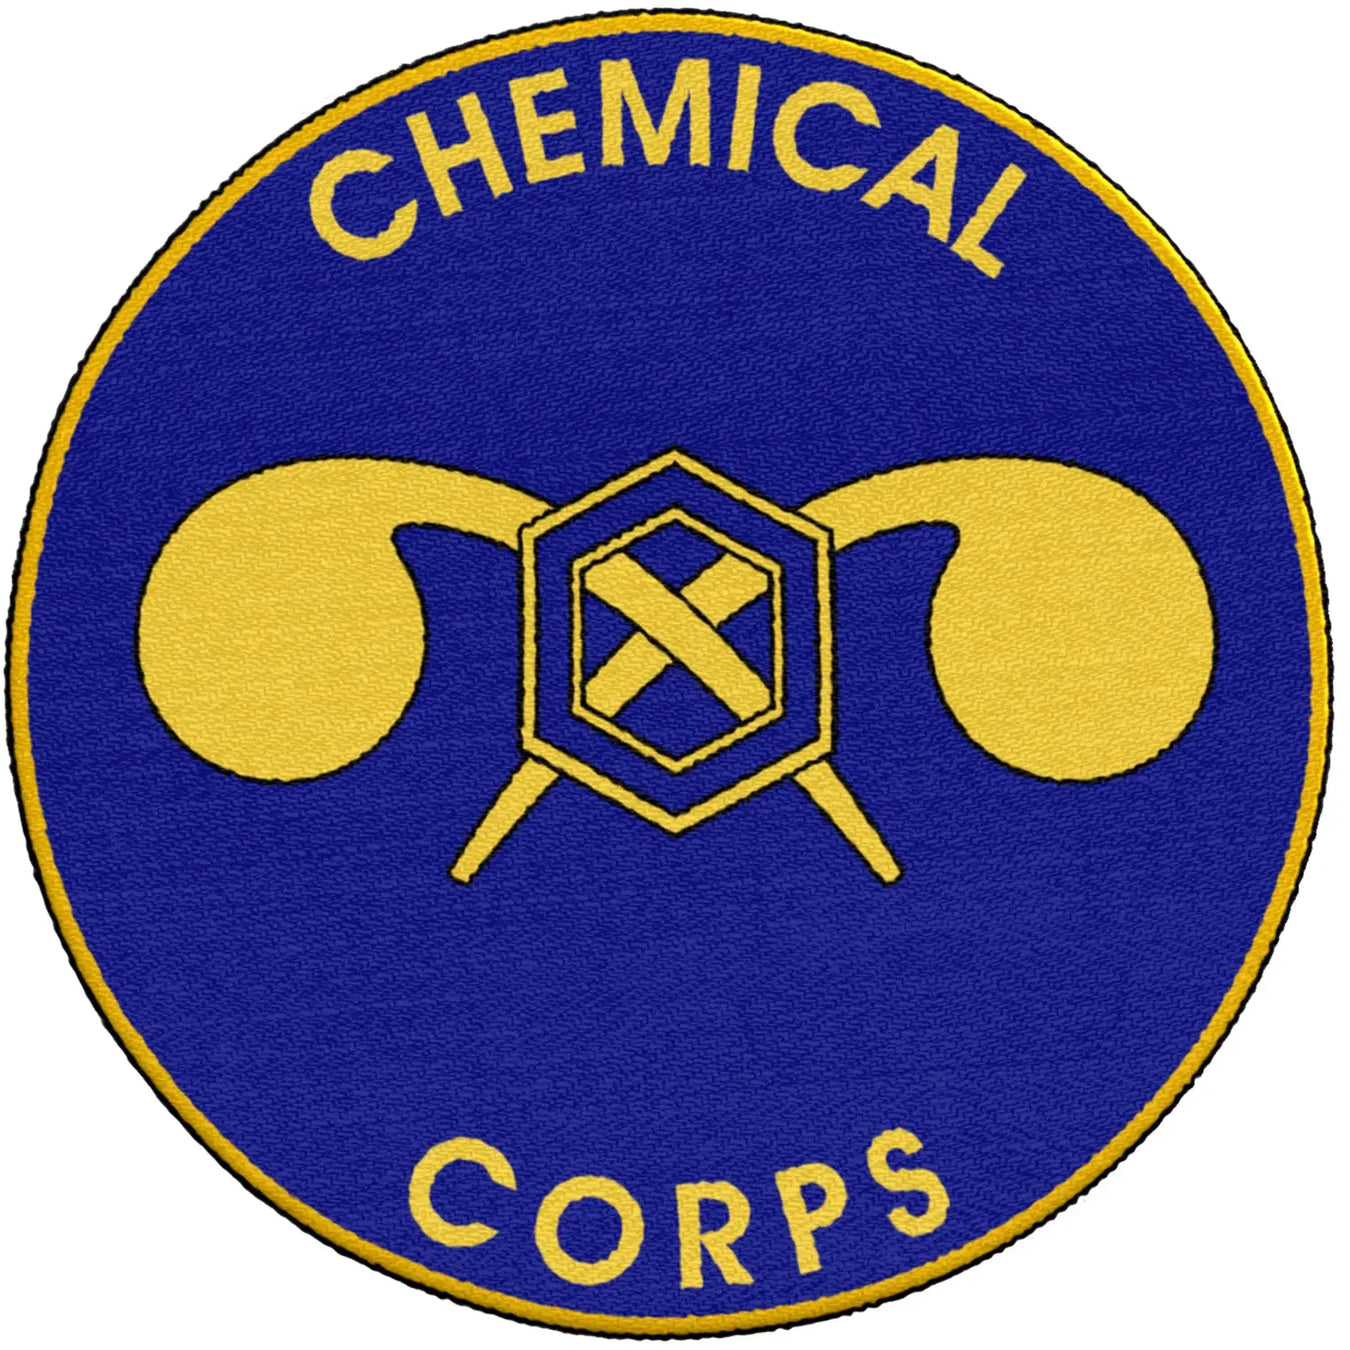 U.S. Army Chemical Corps Patches